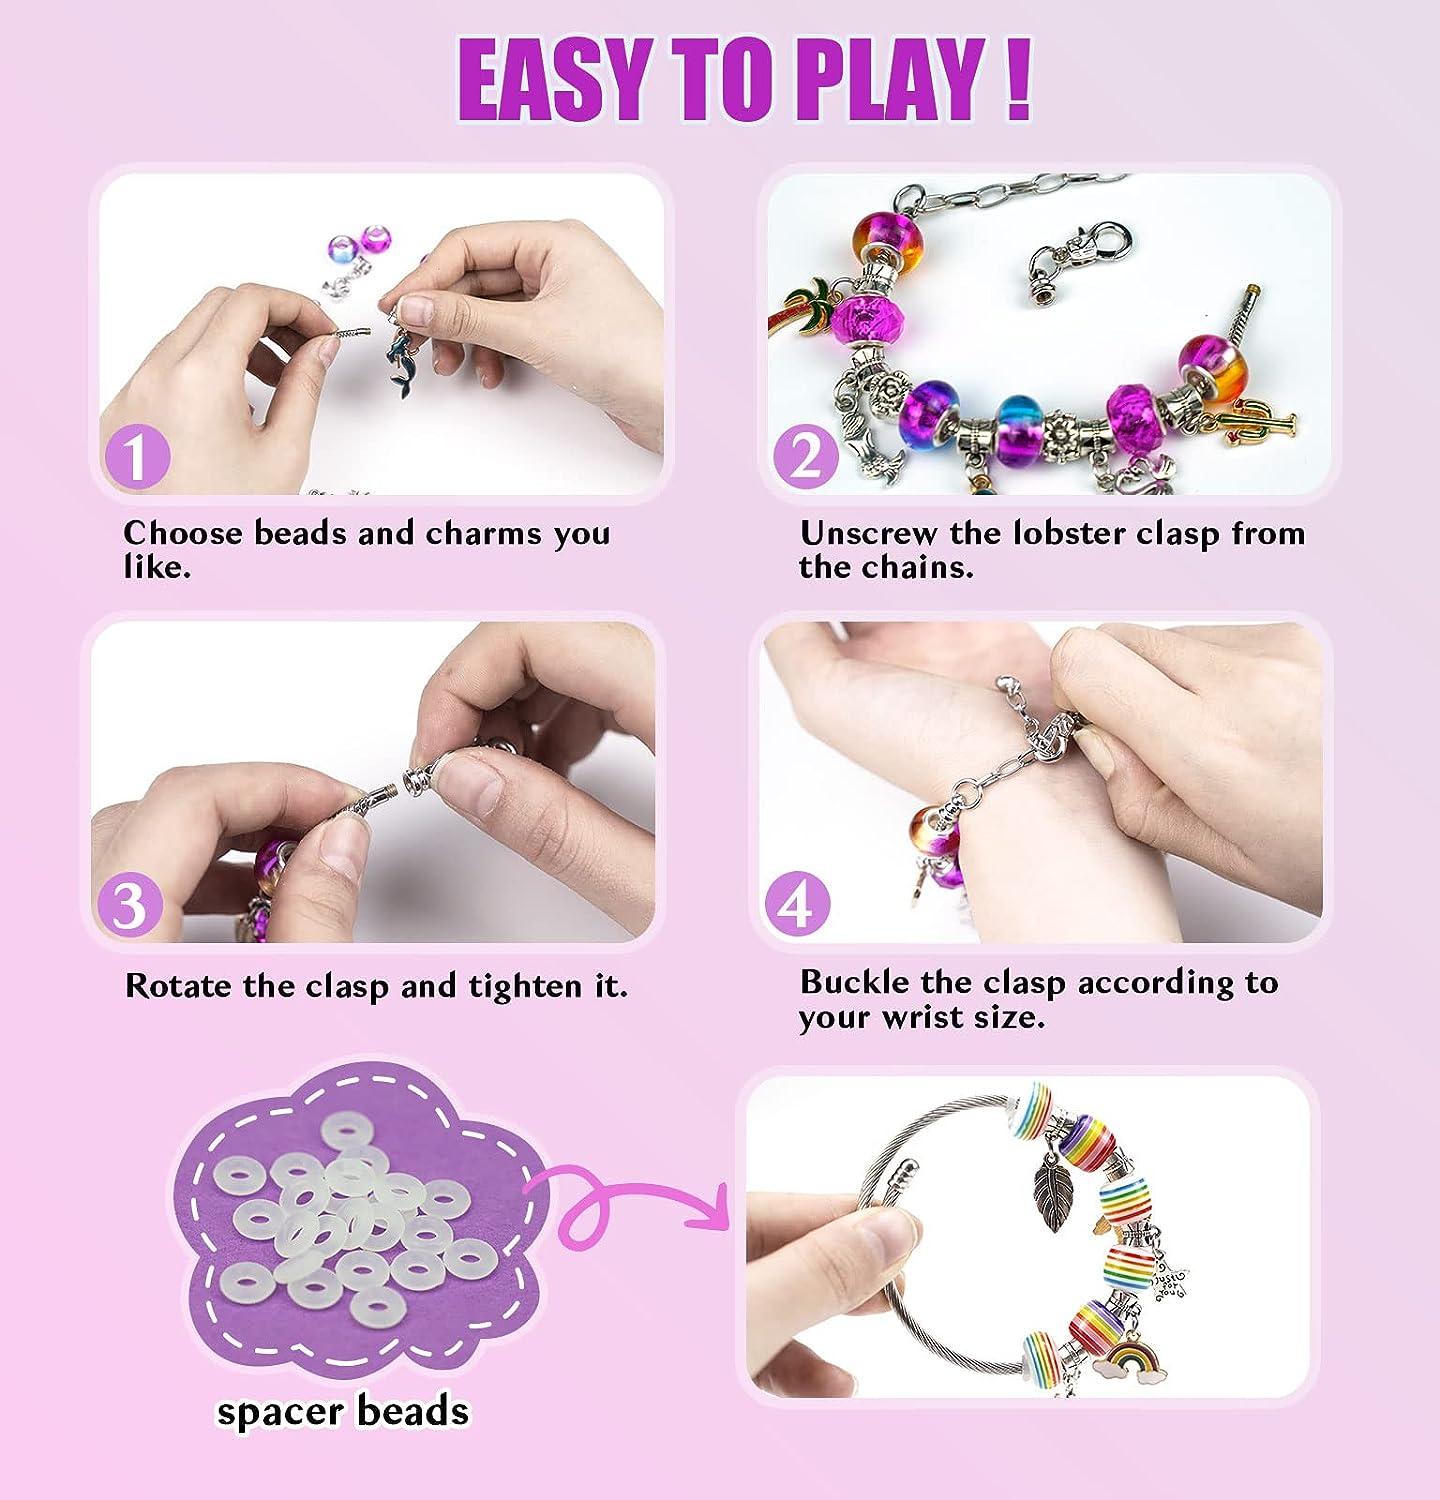 Bracelet DIY Kit Set for Jewelry Making, Cute Charms Jewelry 3D Beads  Birthday Christmas Gift for Kids Girls Women